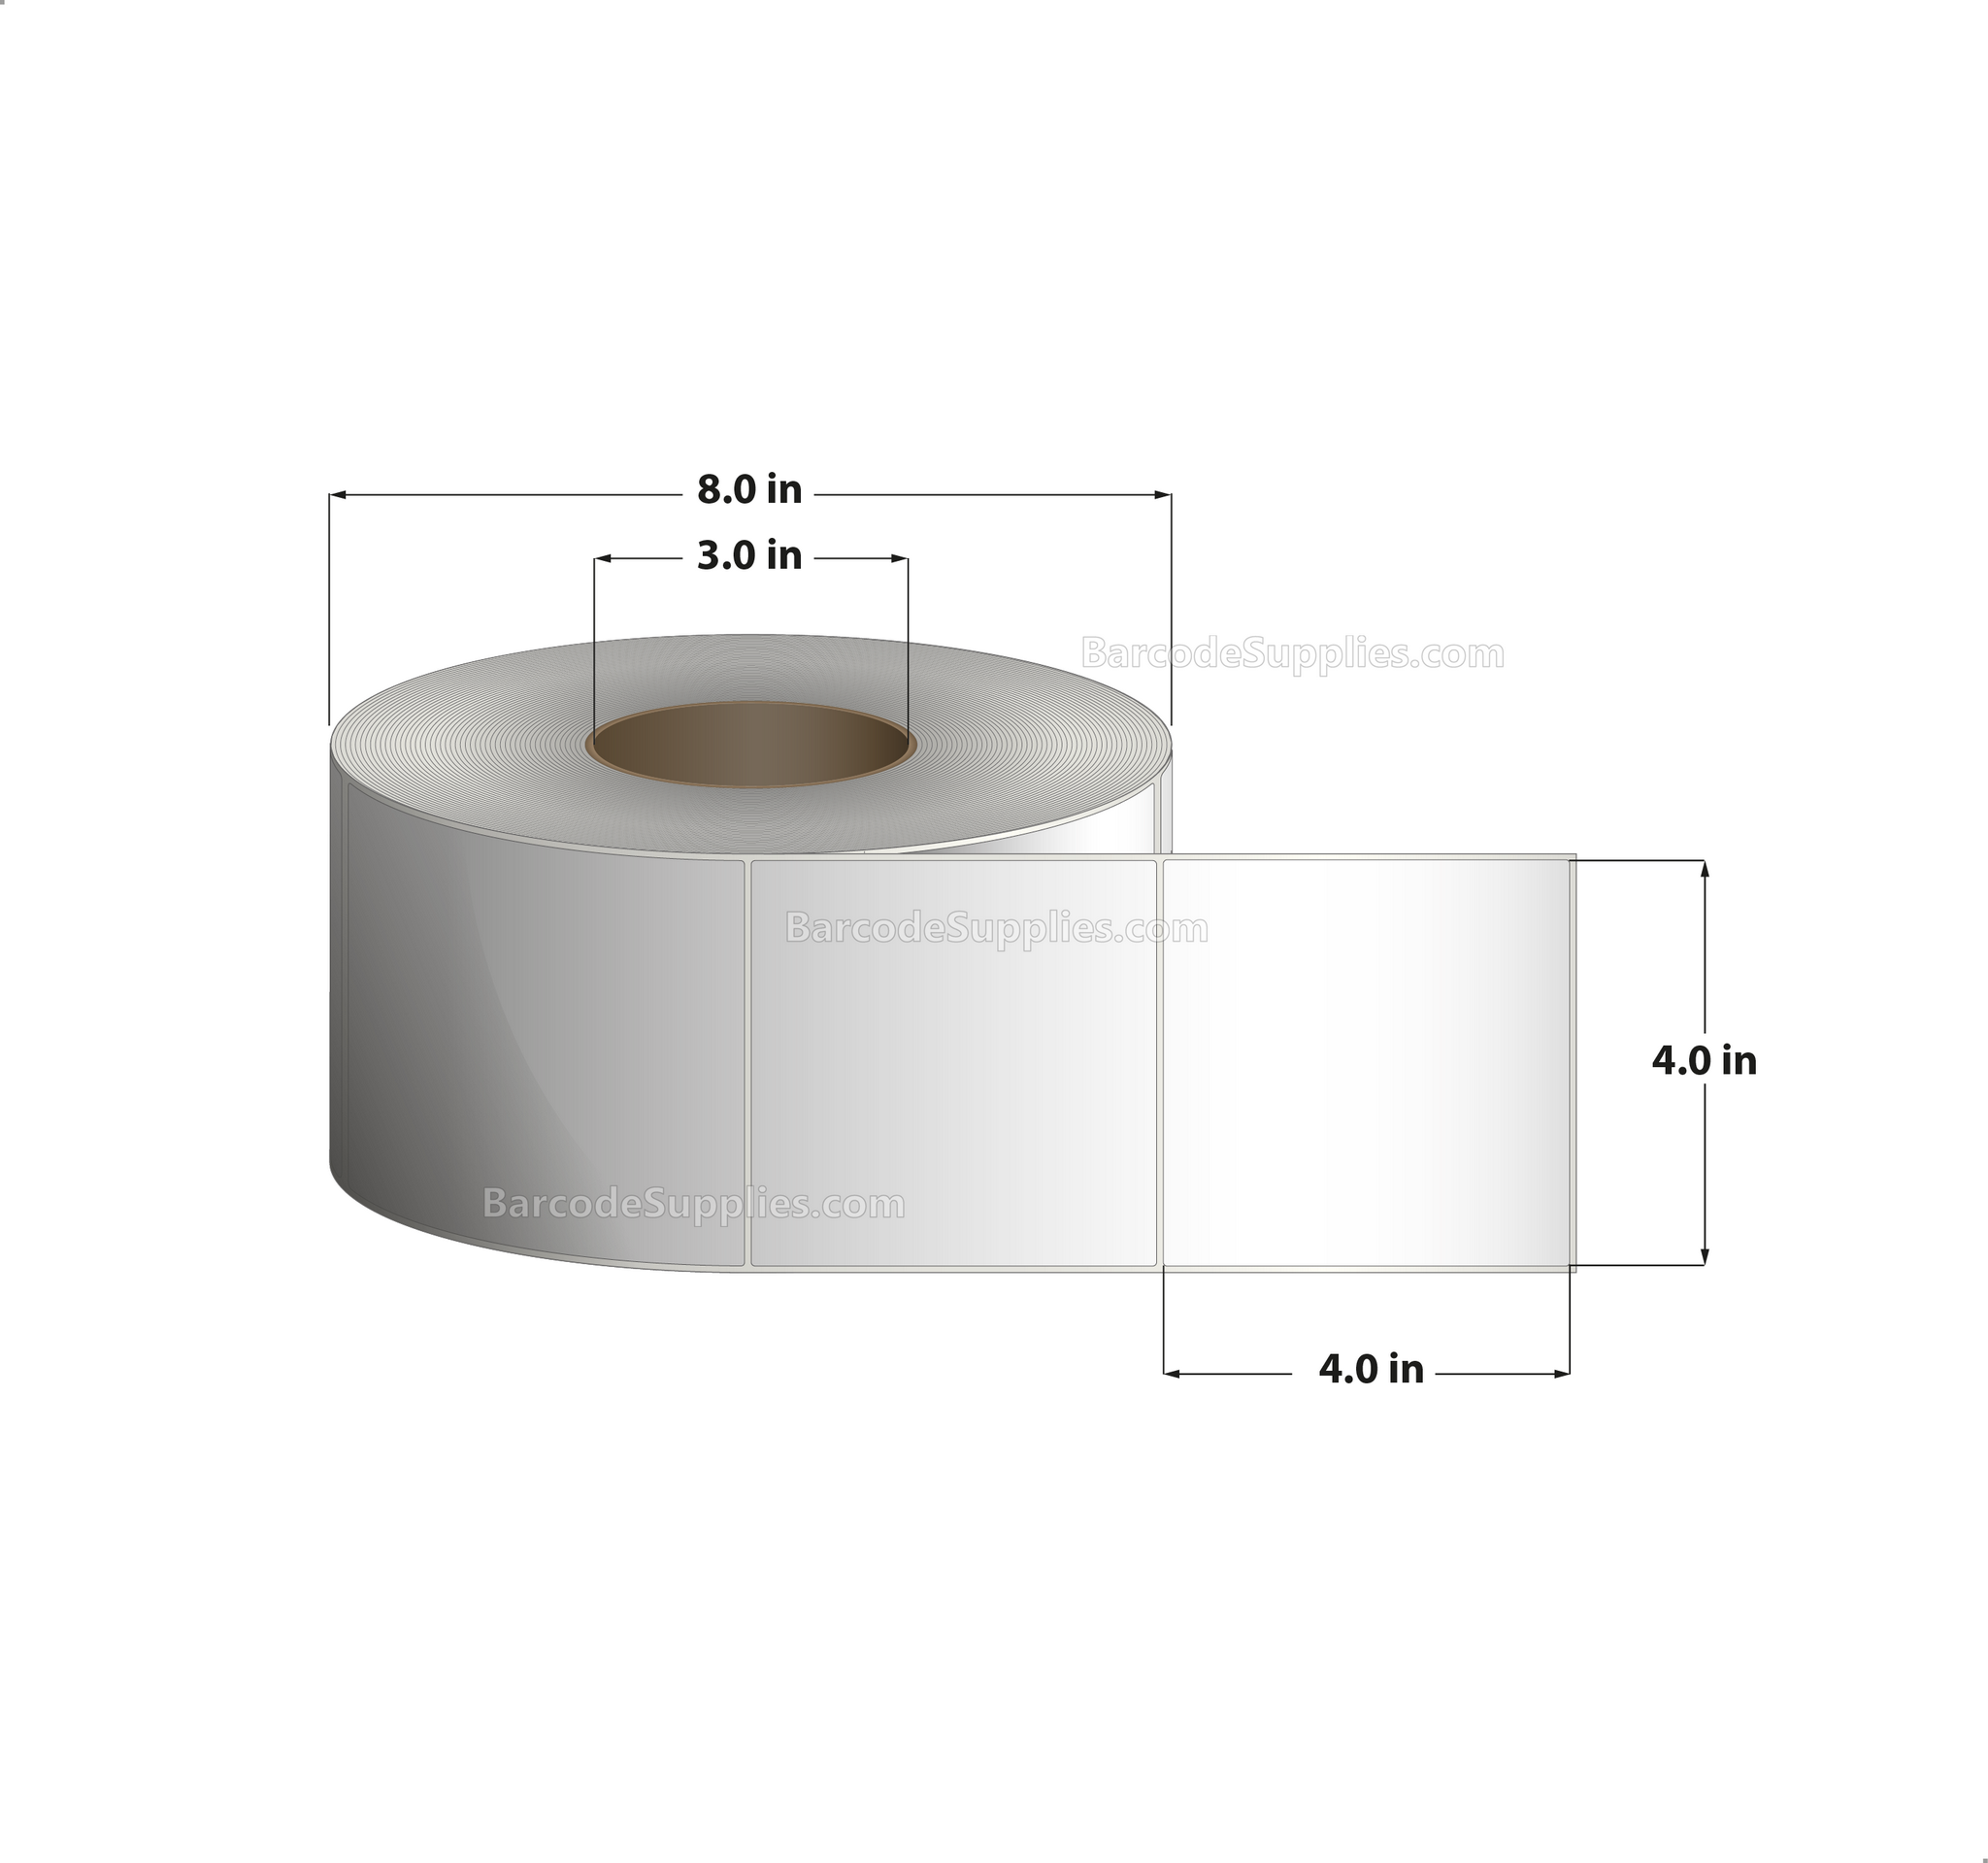 4 x 4 Thermal Transfer White Labels With Rubber Adhesive - No Perforation - 1500 Labels Per Roll - Carton Of 4 Rolls - 6000 Labels Total - MPN: CTT400400-3